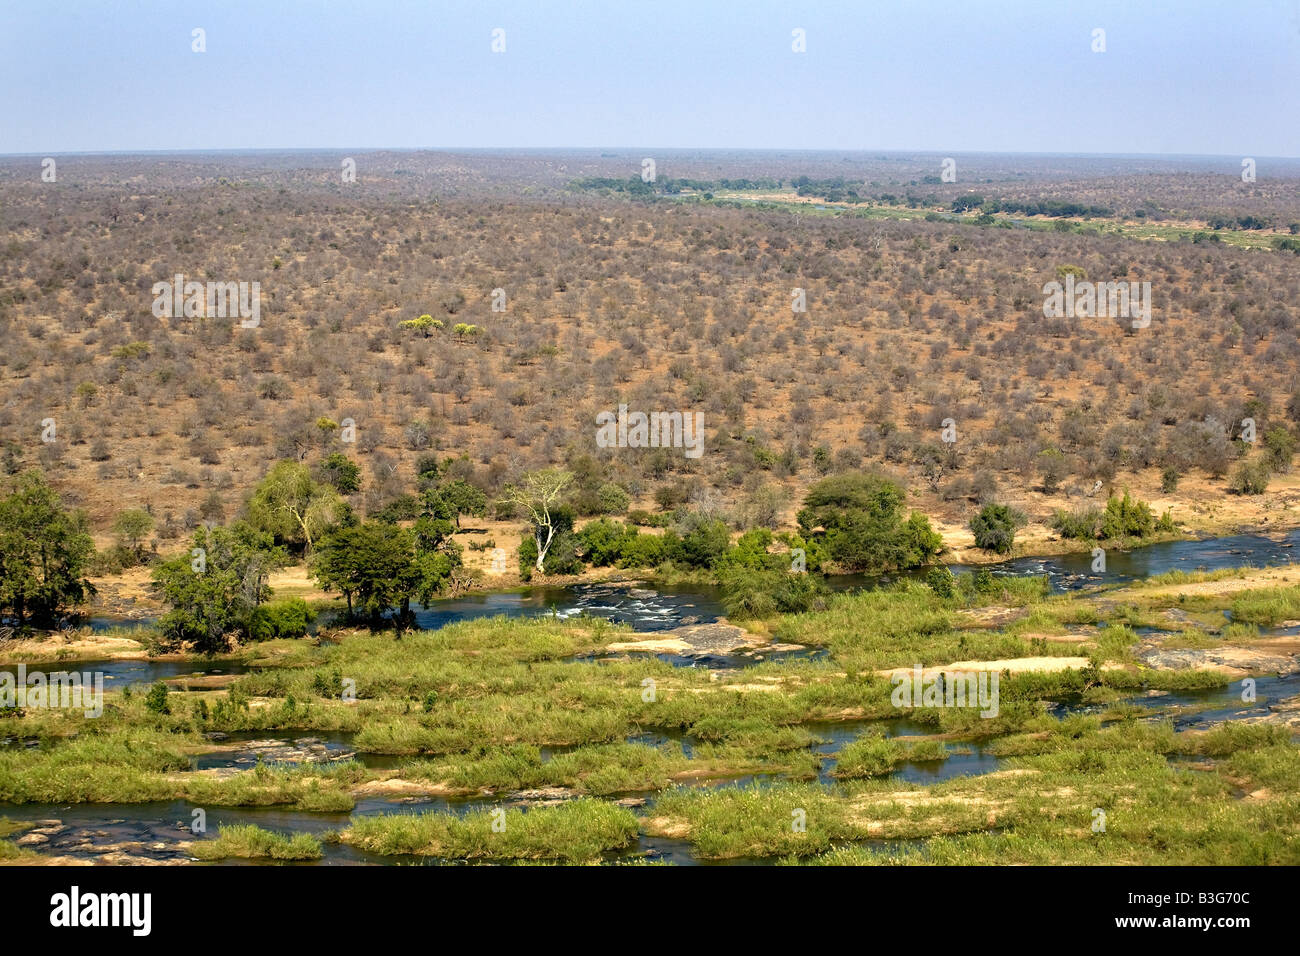 Bushveldt with Olifants River from Olifants Camp in Kruger National Park South Africa Stock Photo